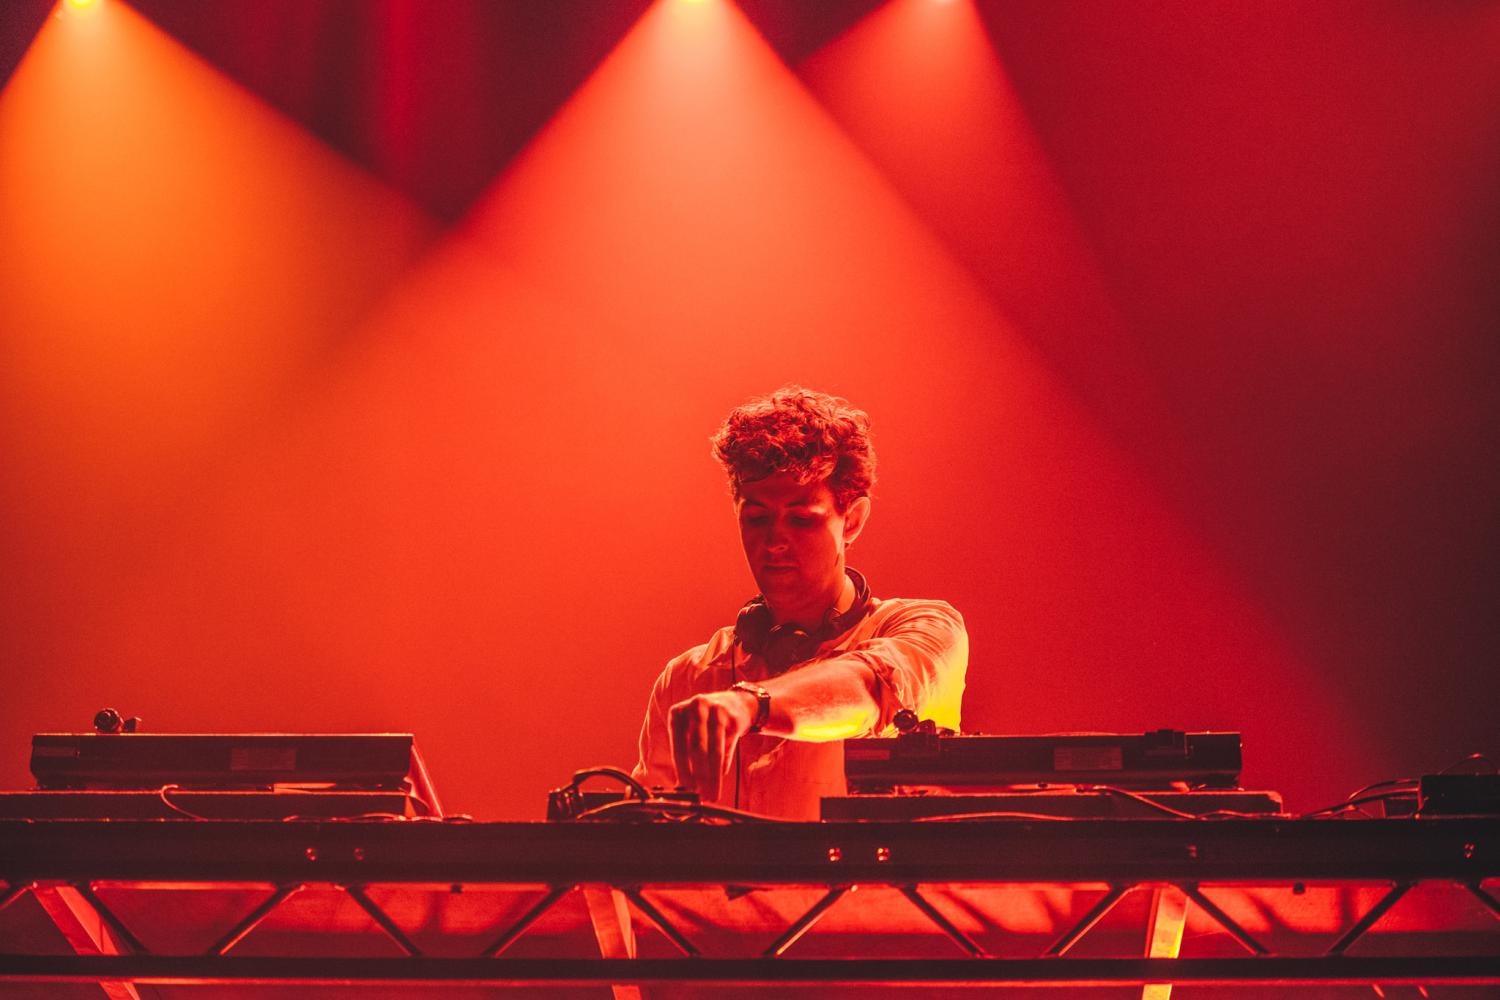 Jamie Xx Plans To Release New Music Video For Gosh Music News Conversations About Her